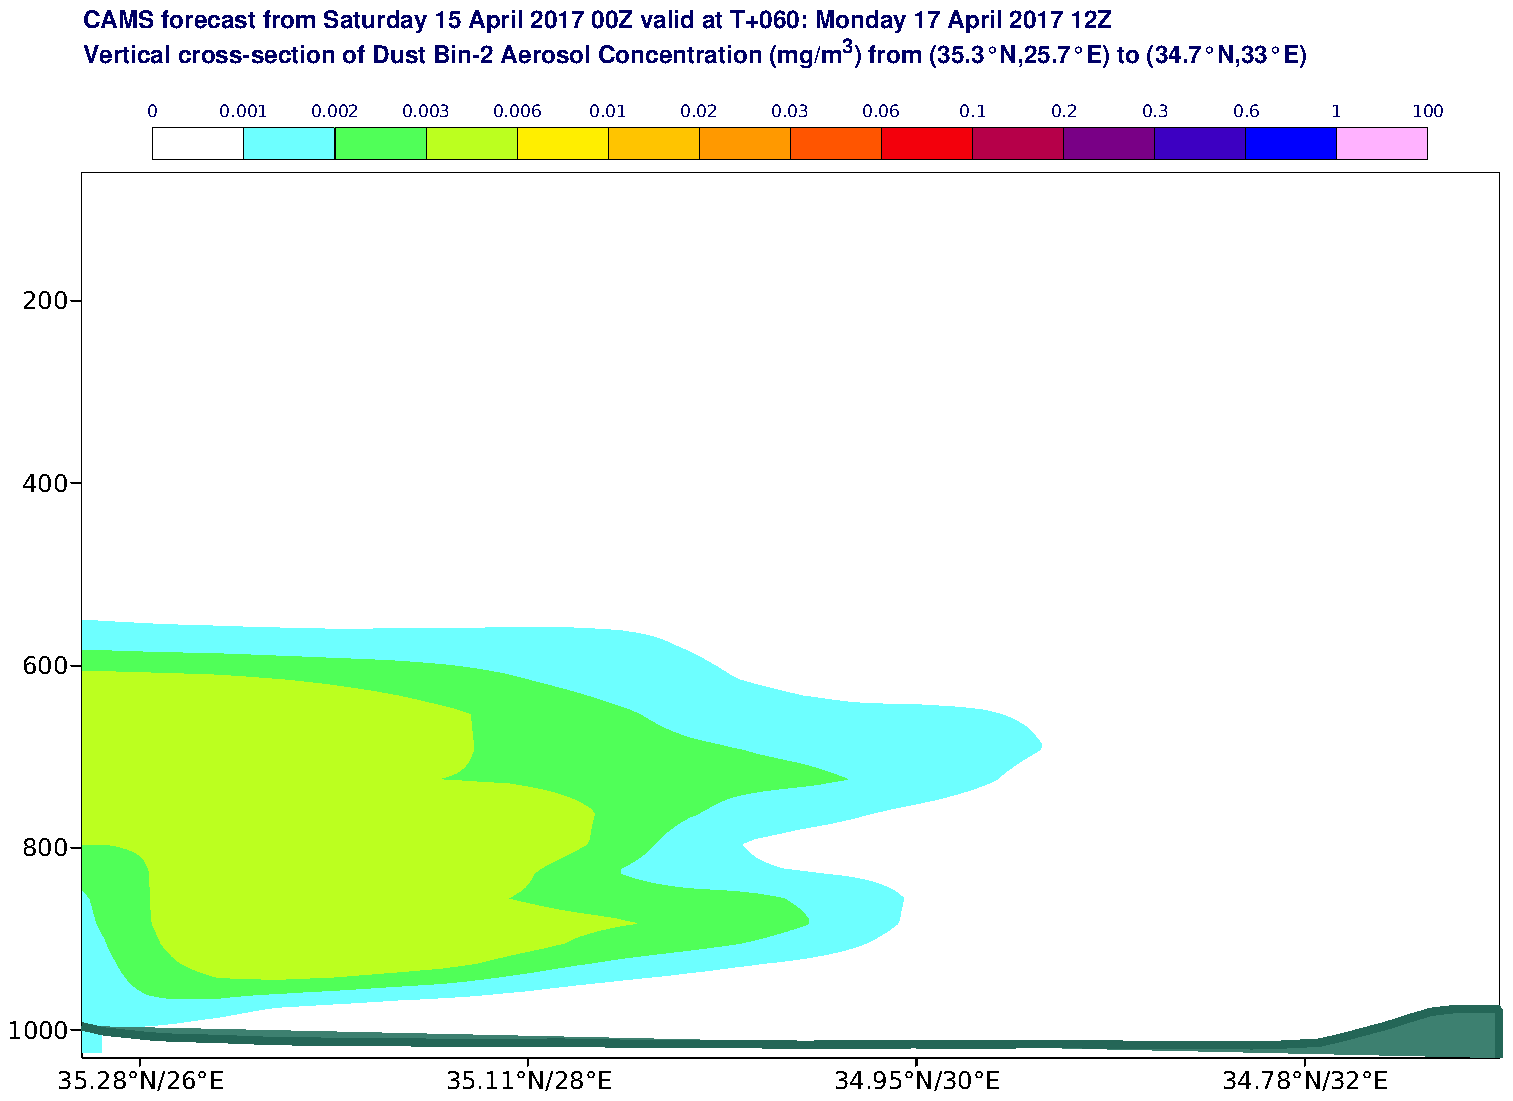 Vertical cross-section of Dust Bin-2 Aerosol Concentration (mg/m3) valid at T60 - 2017-04-17 12:00